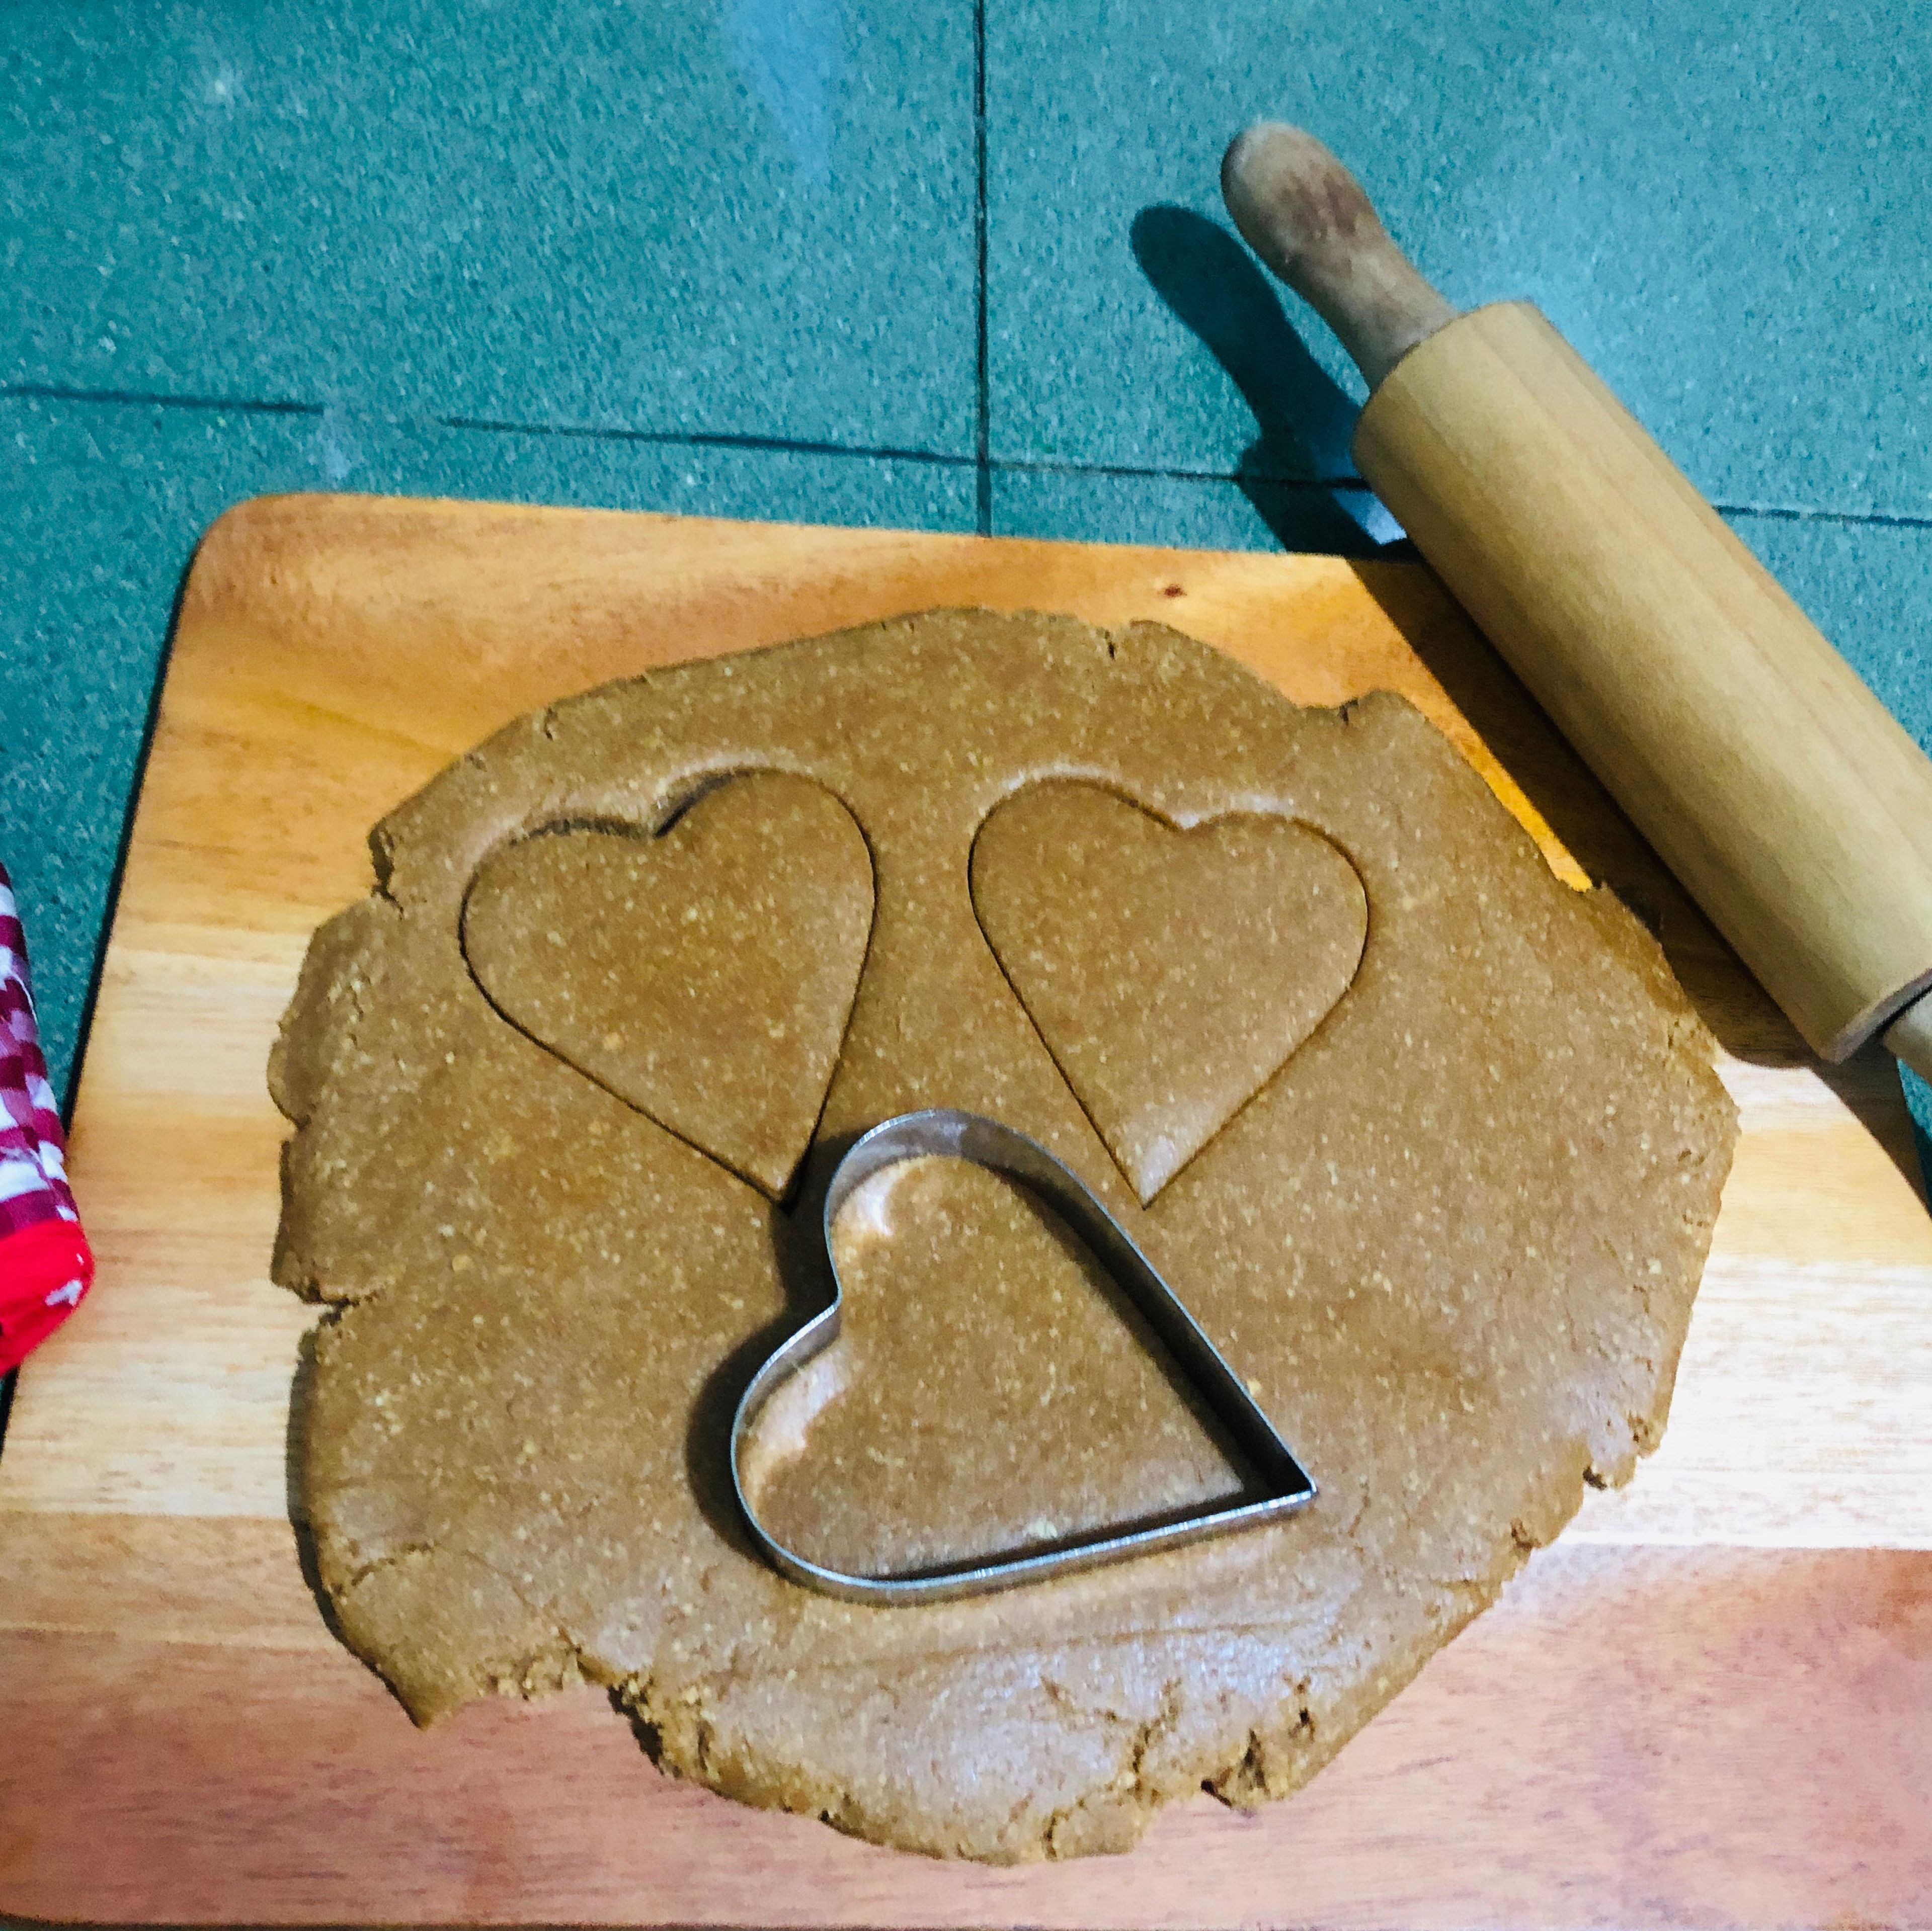 Roll the dough and cut it with cookie cutter.